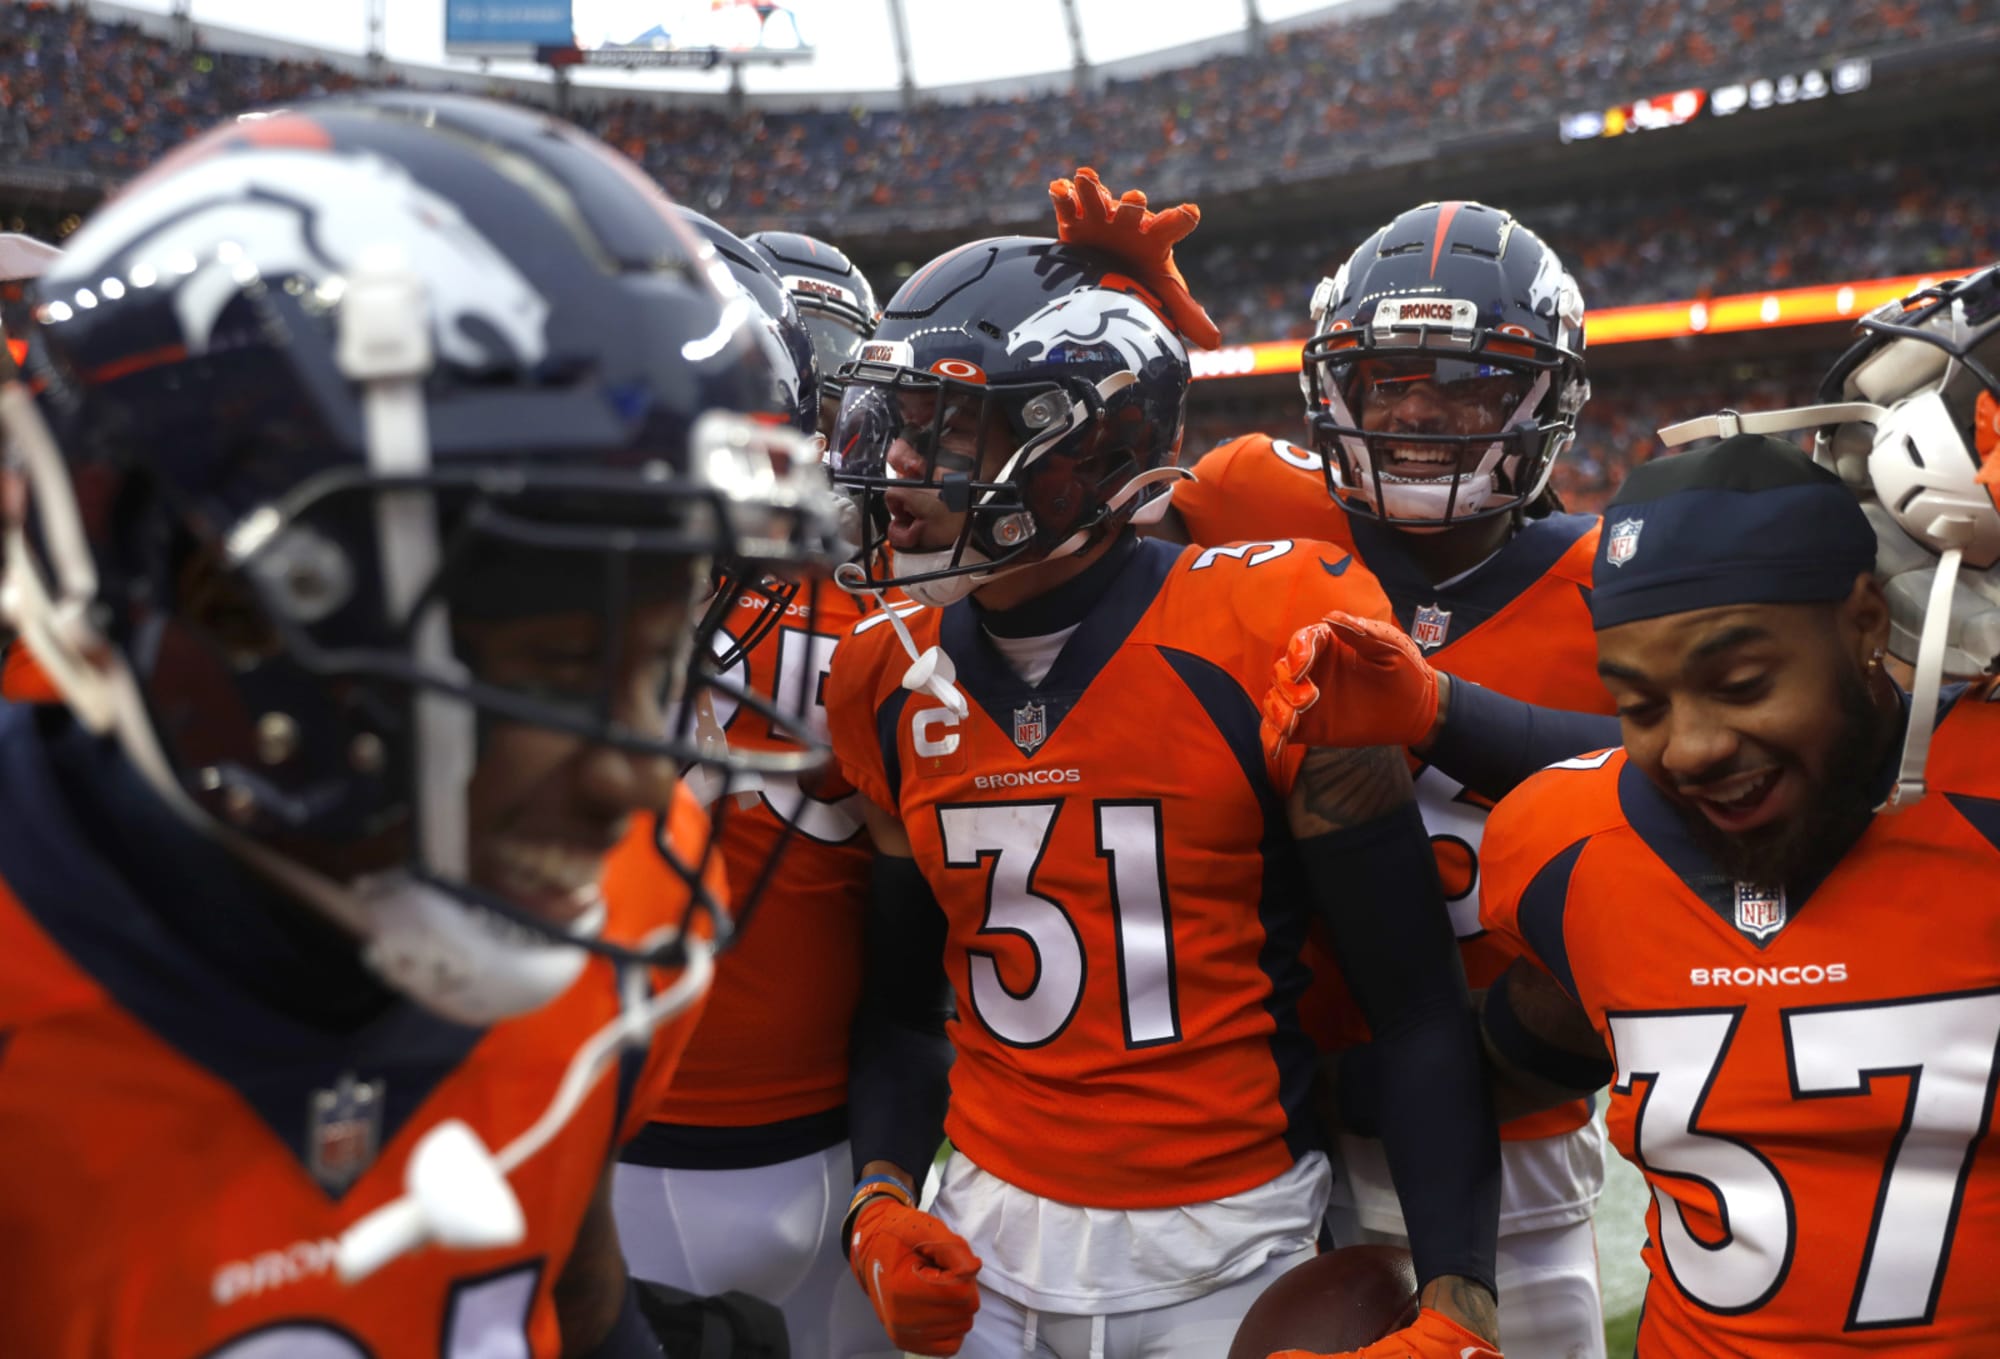 PFF Power Rankings have Denver Broncos near the very top